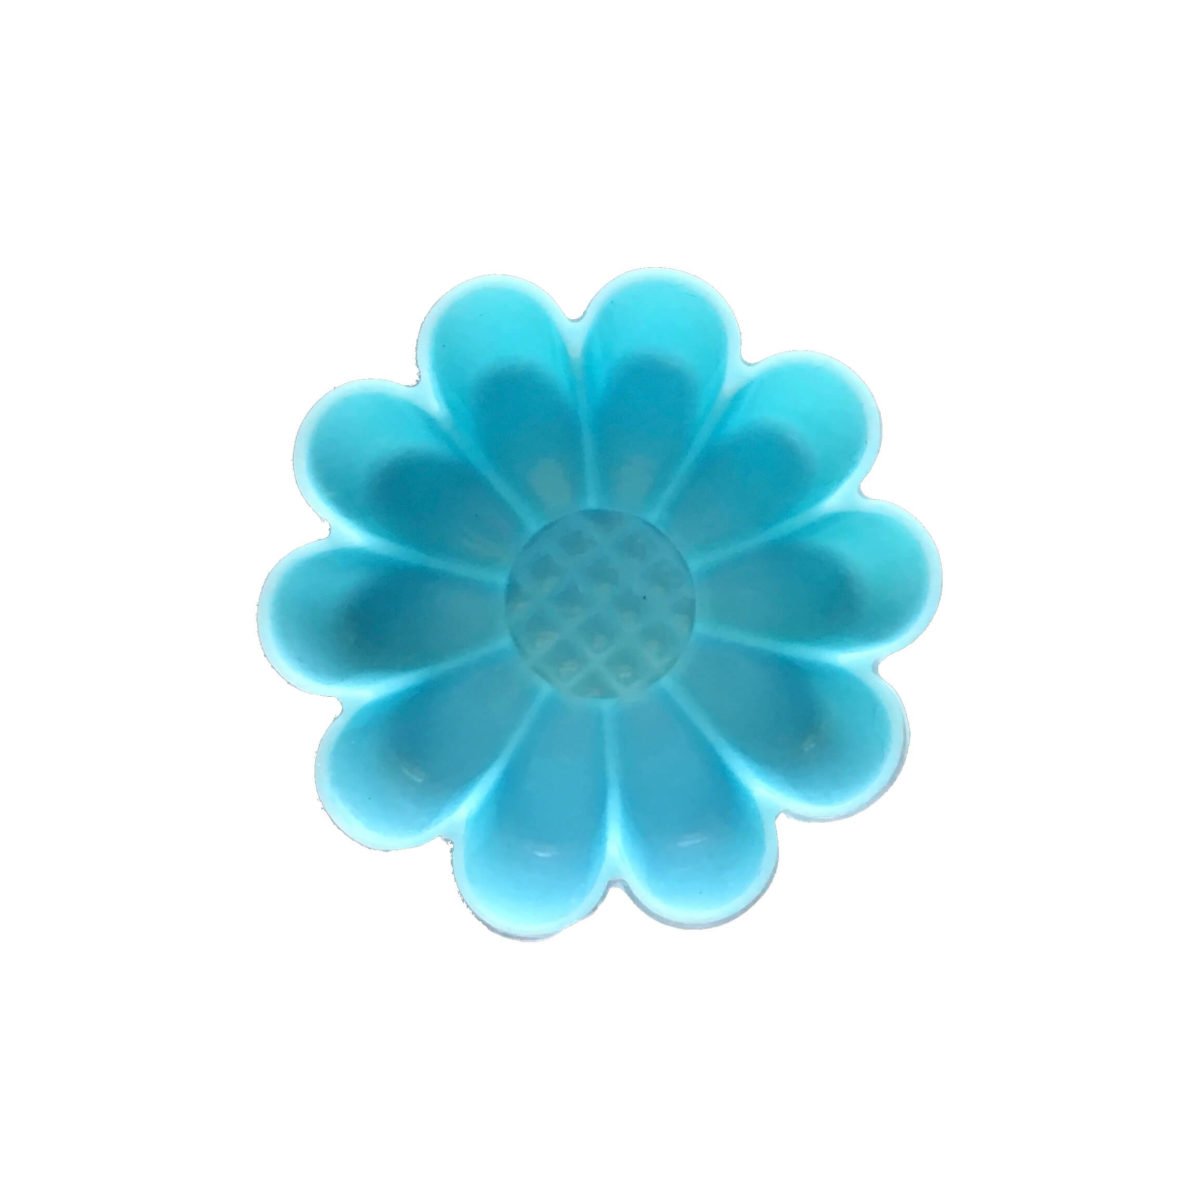 back of 5cm blue daisy flower single cavity silicone mould